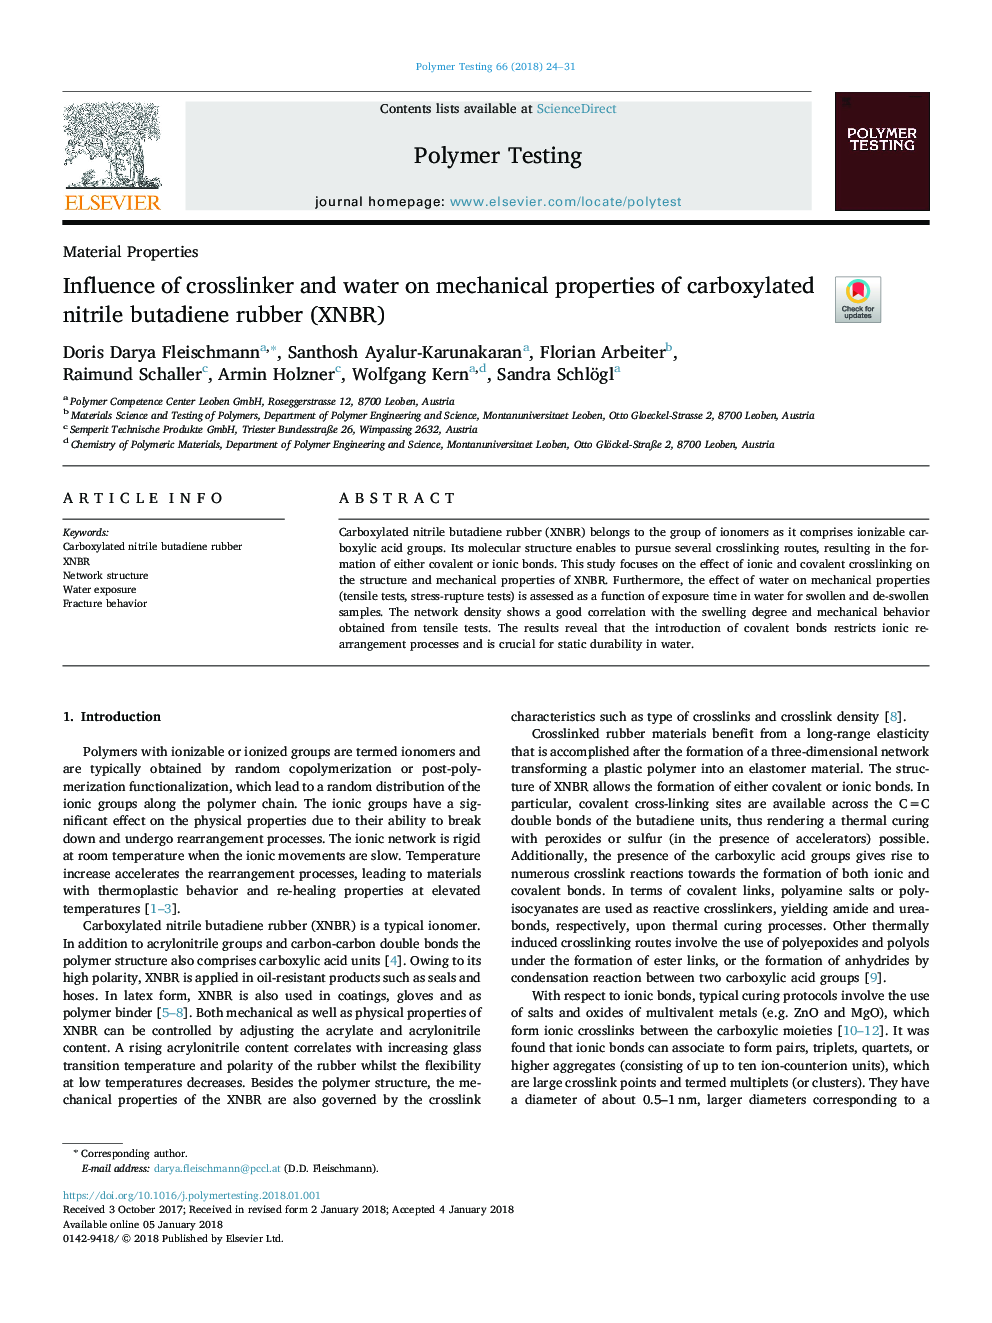 Influence of crosslinker and water on mechanical properties of carboxylated nitrile butadiene rubber (XNBR)